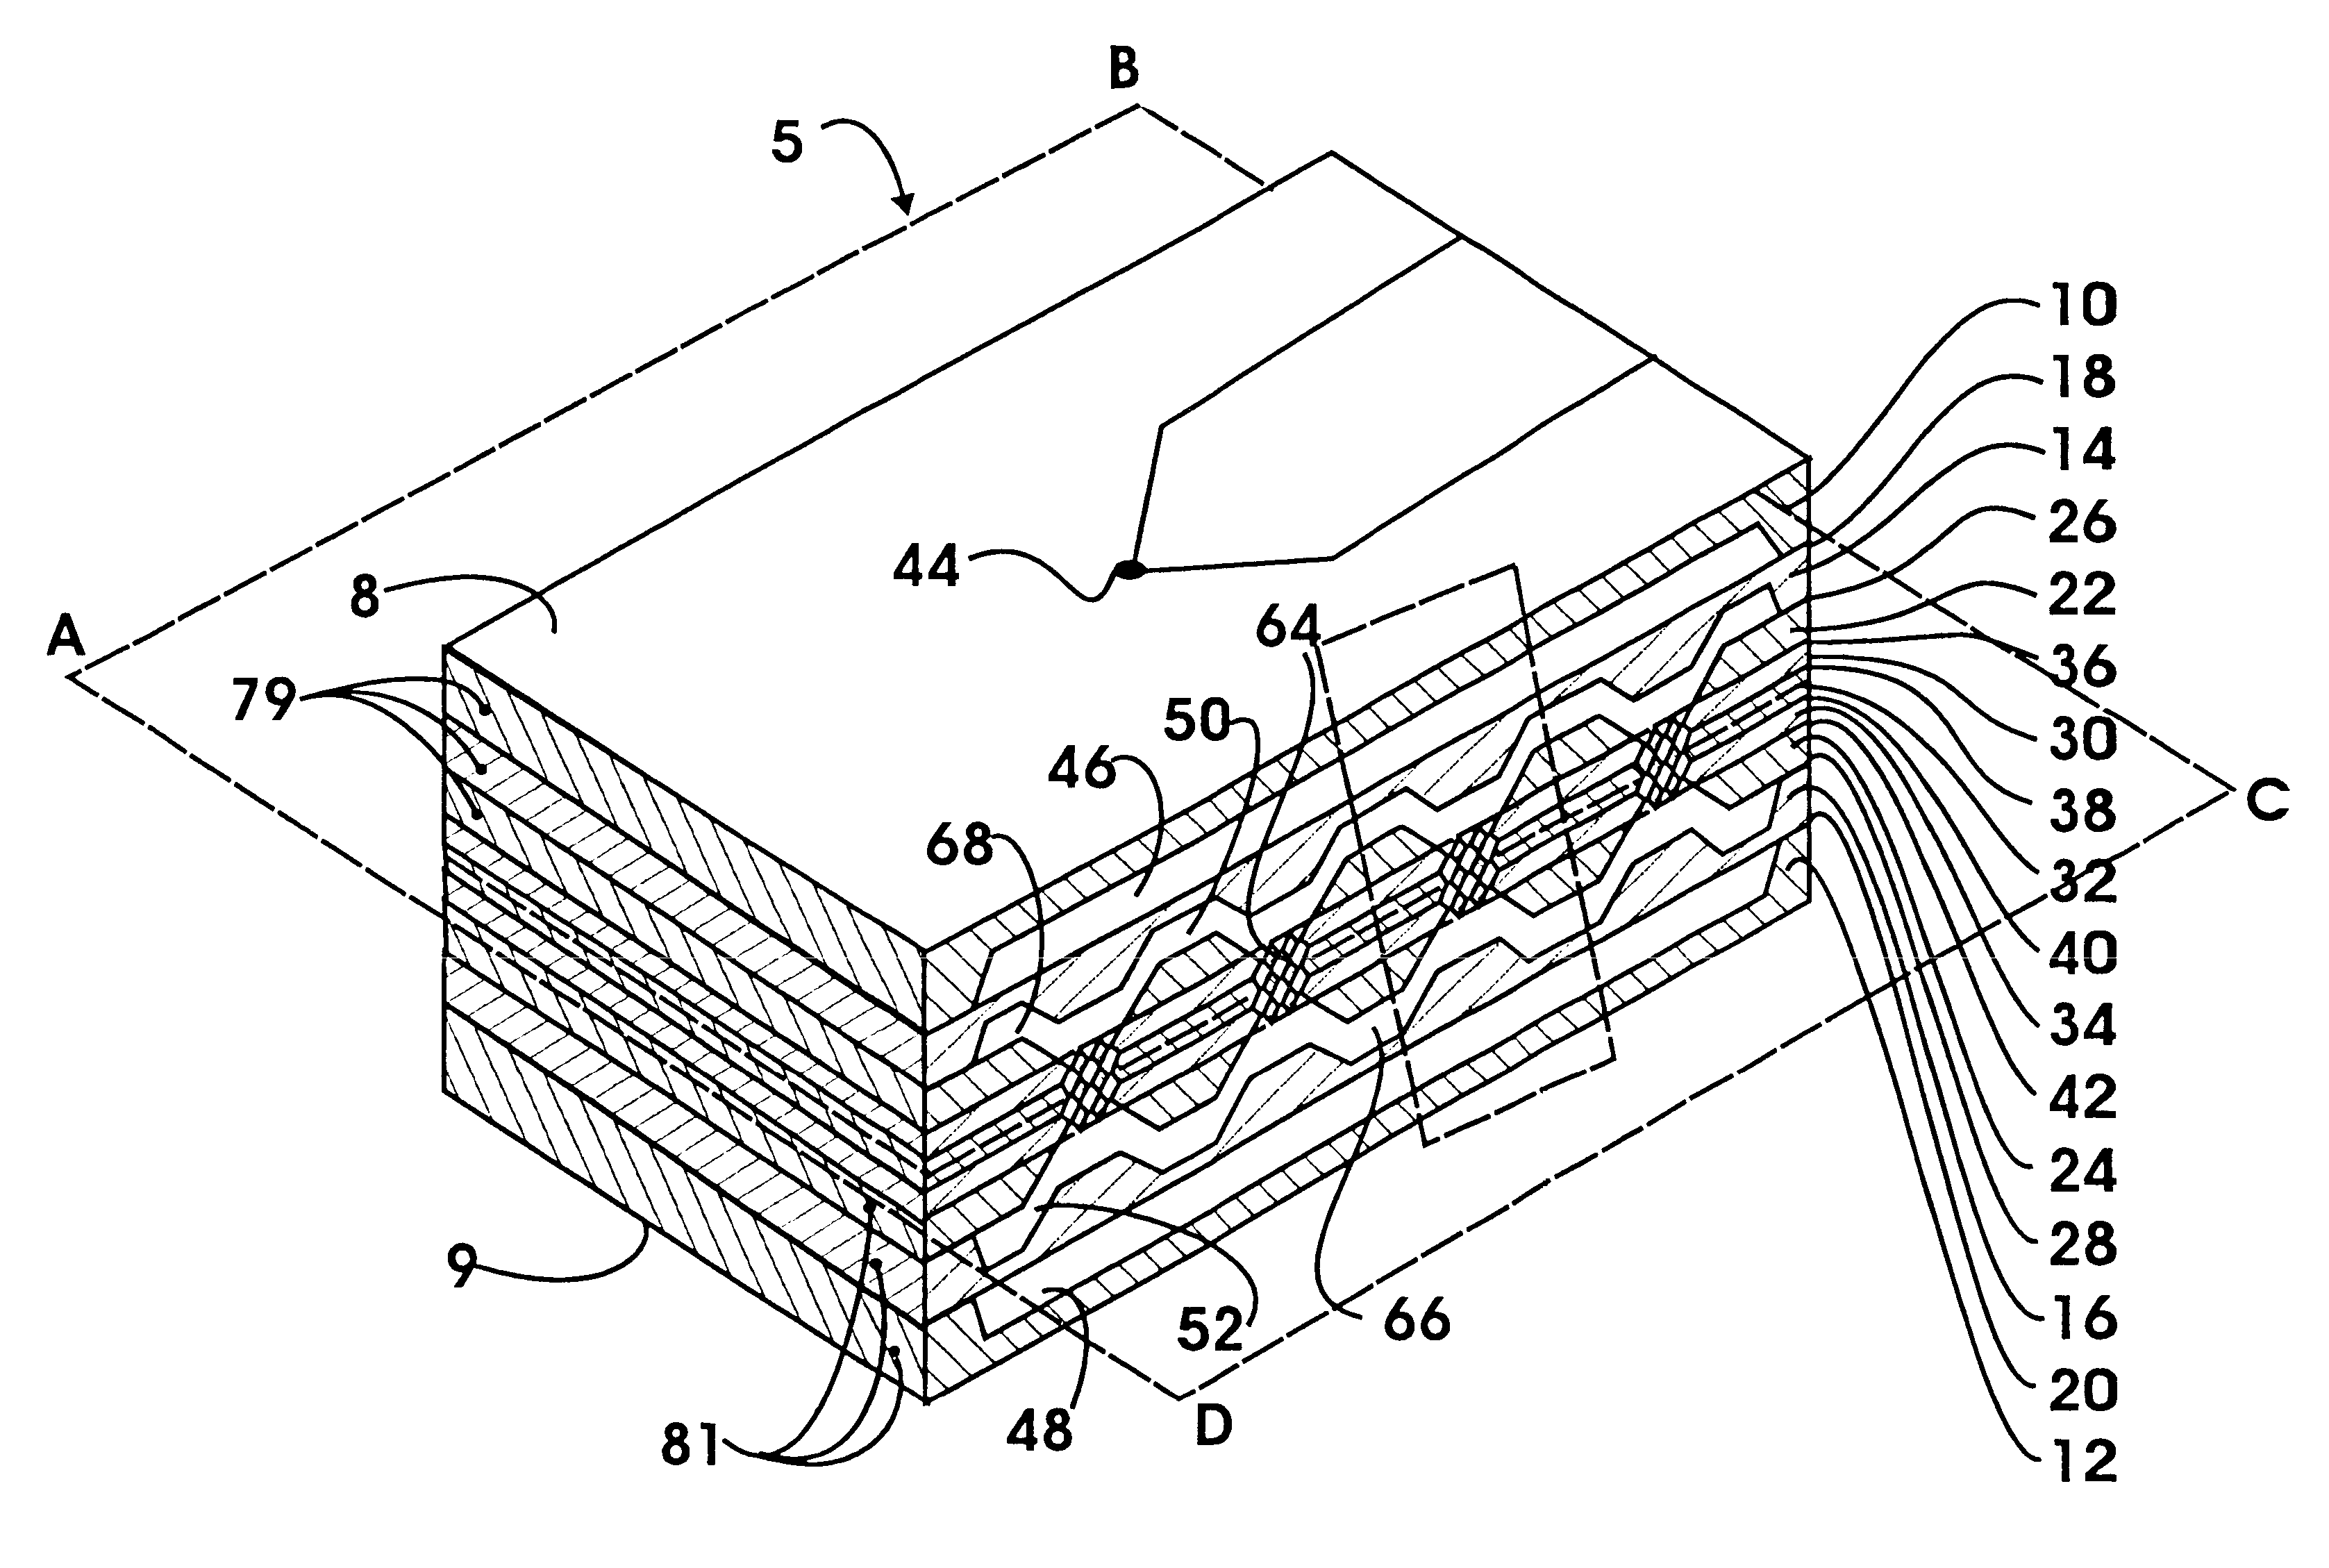 Micro-scalable thermal control device